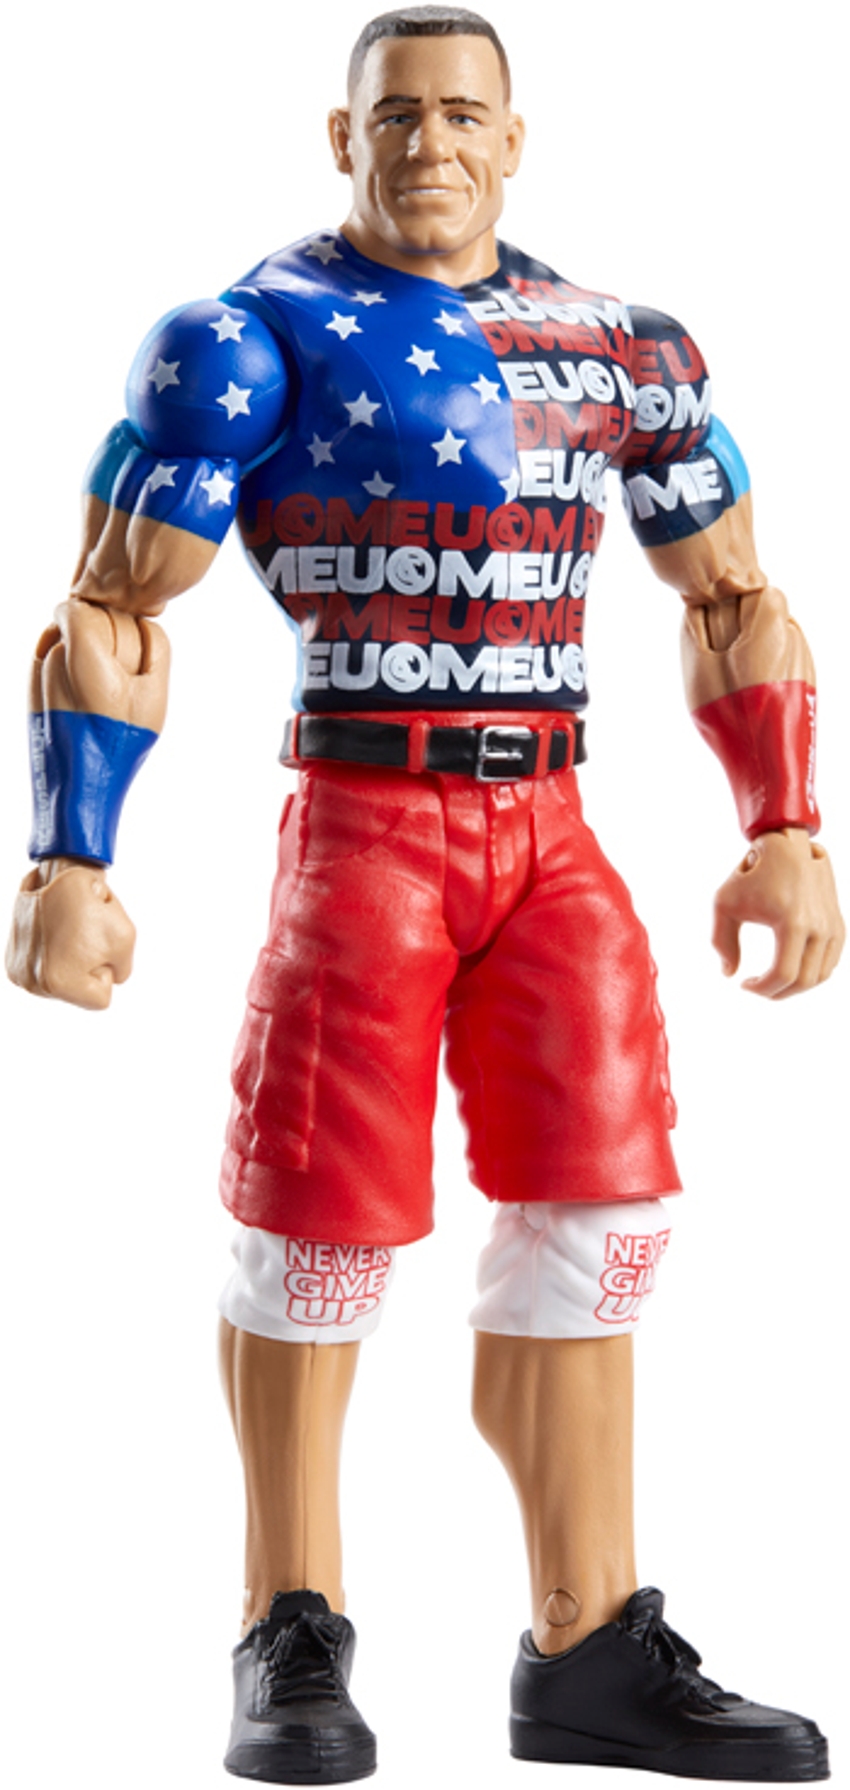 dele timothy recommends john cena toys red pic